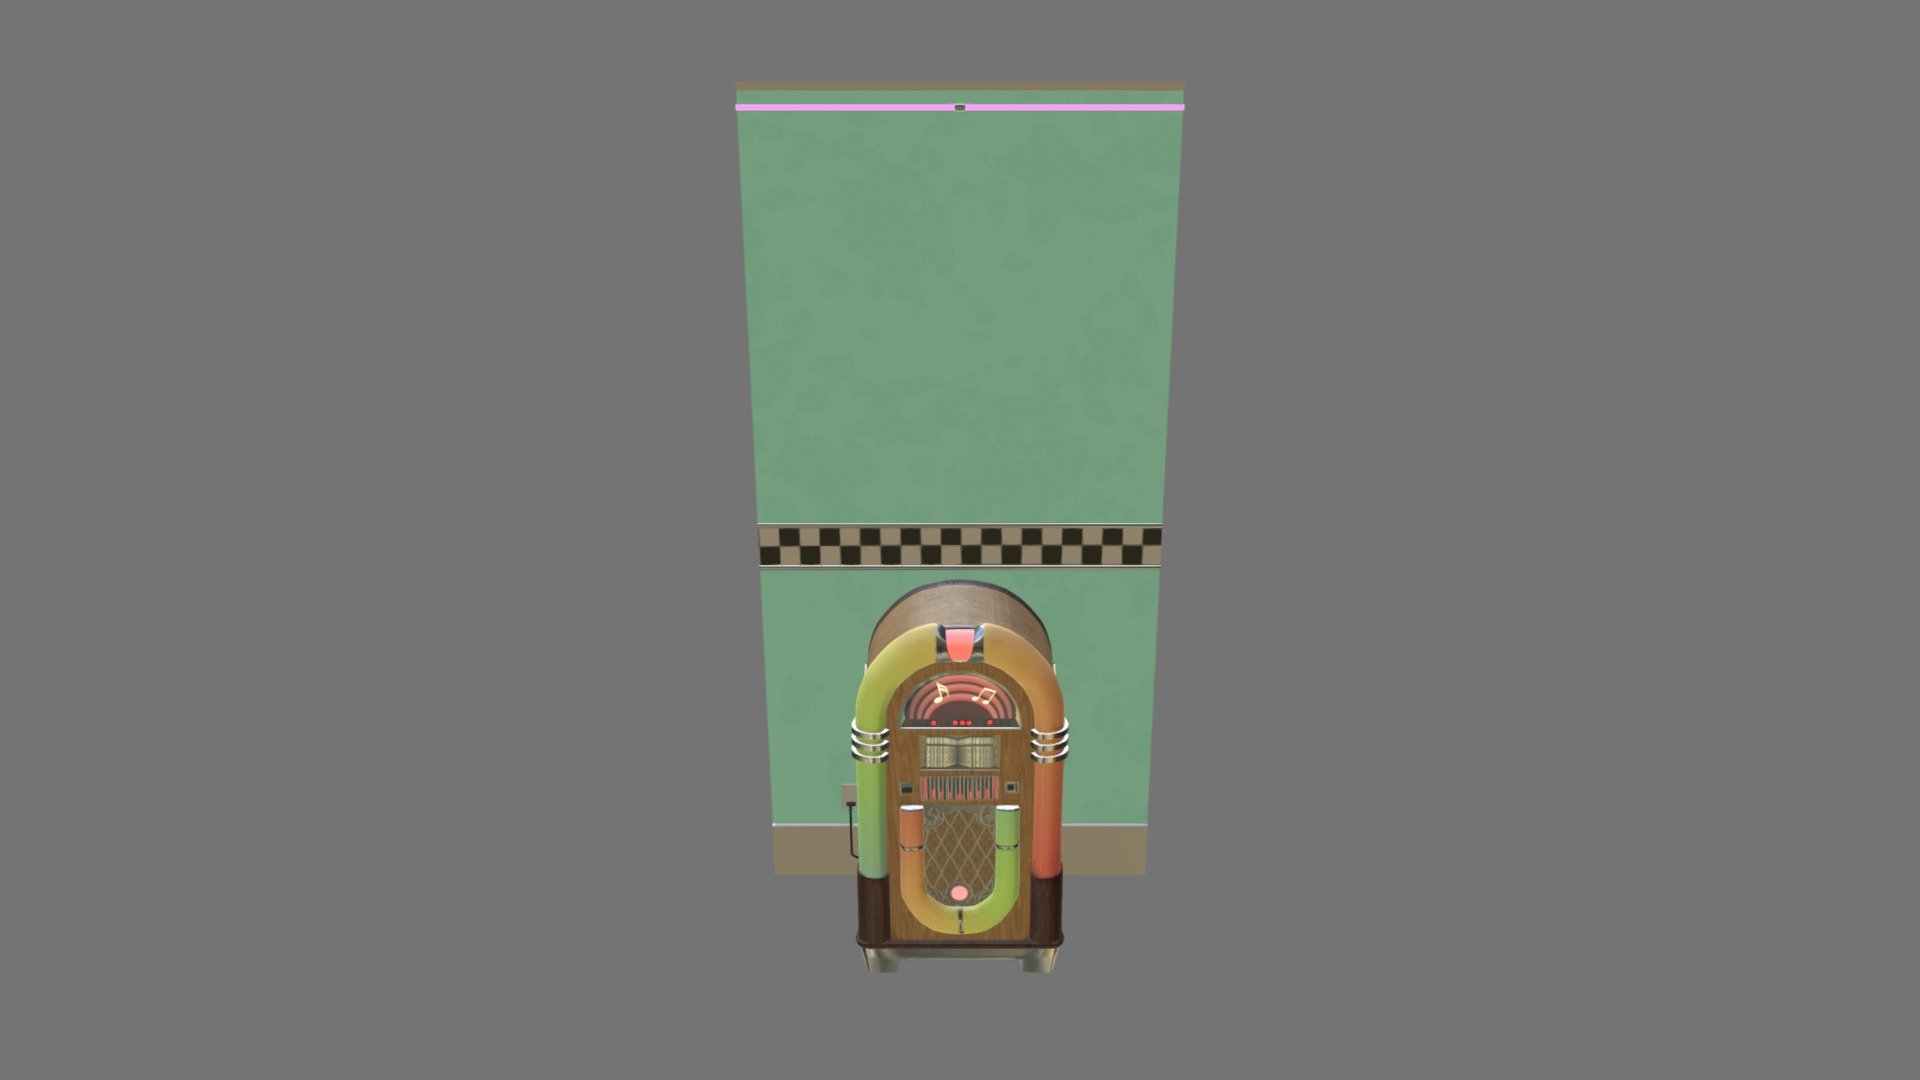 Uploading each group separately due to upload issue.

Theme: 50's Diner
Jukebox and Wall with Outlet

Textures are either custom created or Substance Painter base 3d model